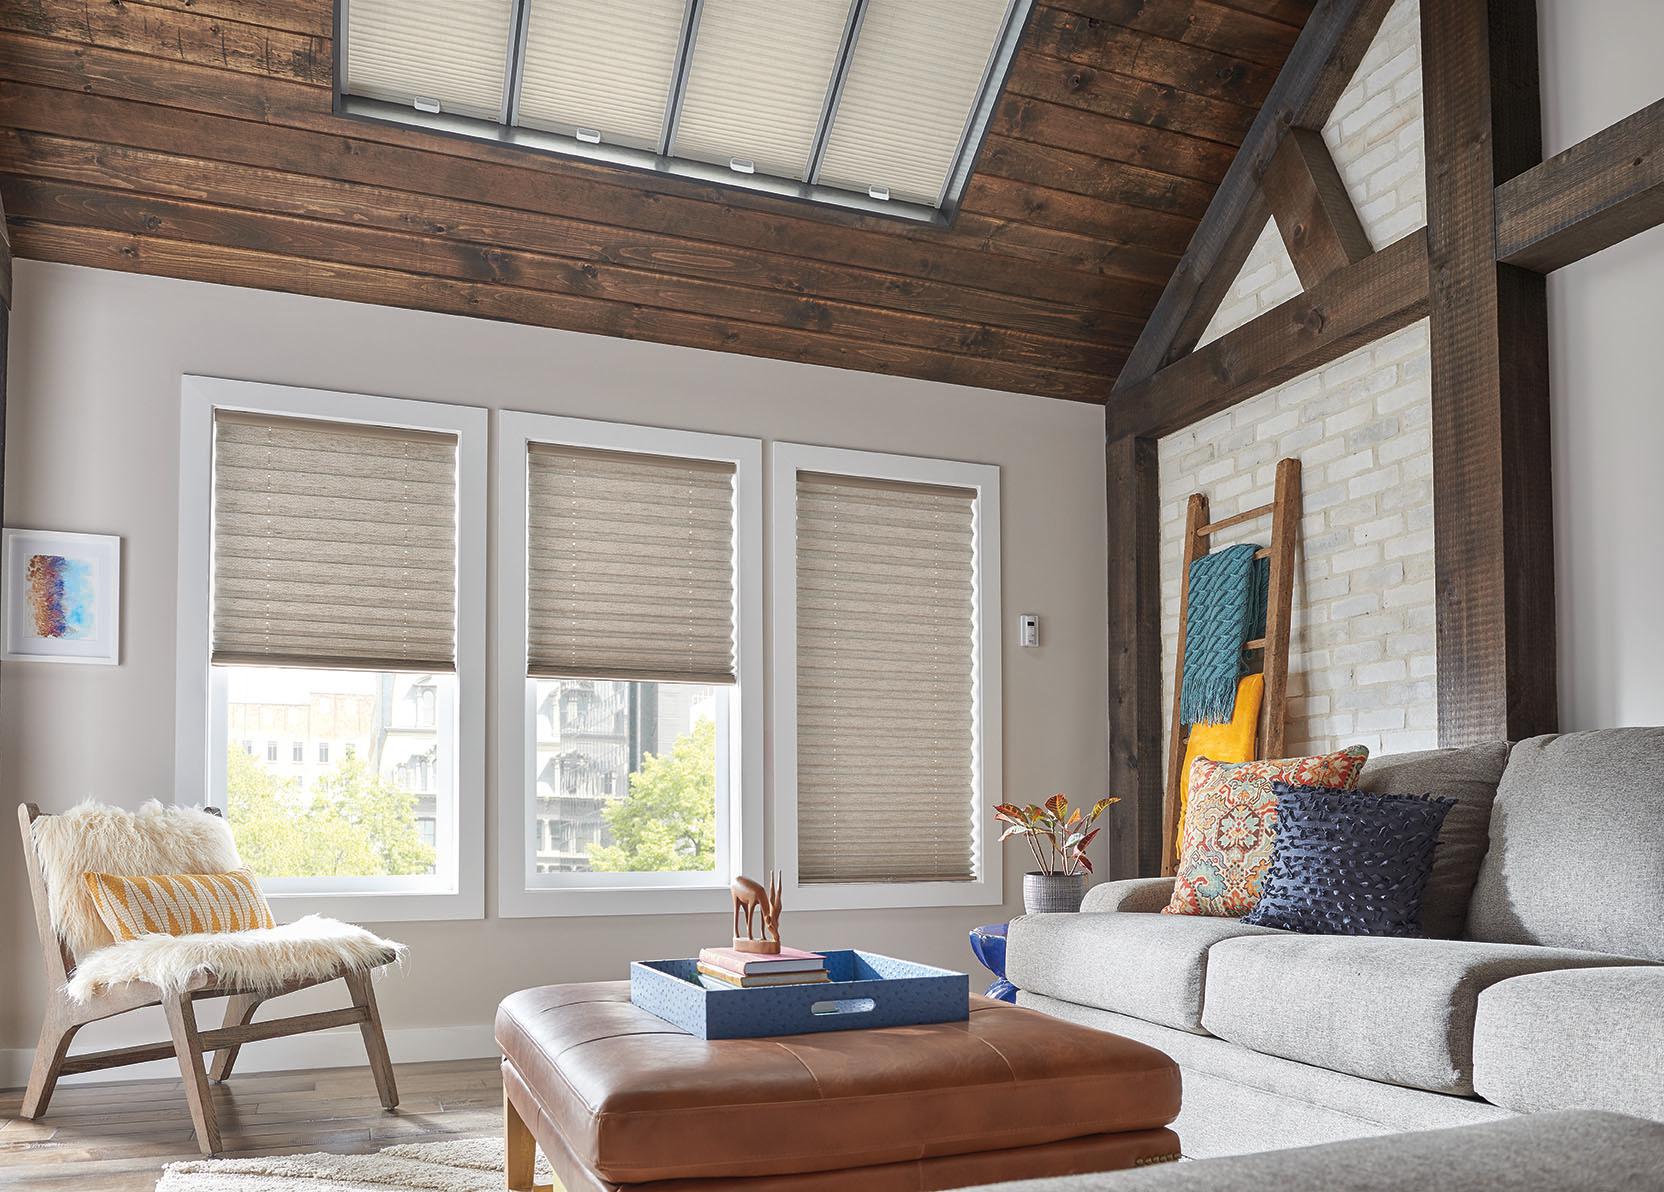 Accent your beautiful beams with neutral window treatments in your living room